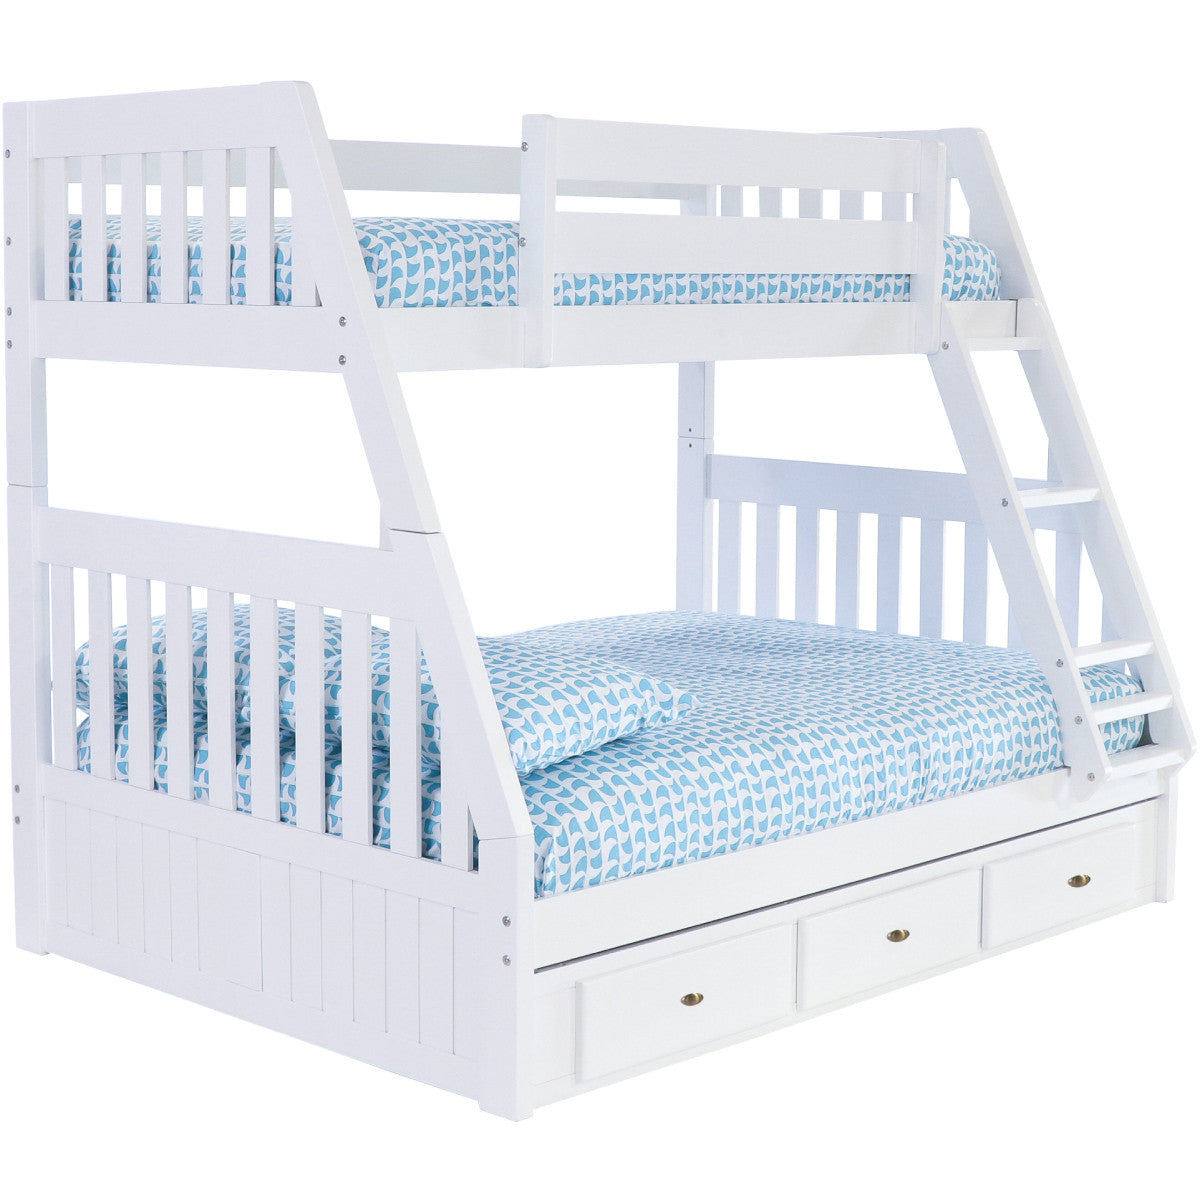 TWIN/FULL MISSION BUNK BED WITH 3 DRAWER UNDERBED STORAGE IN WHITE FINISH